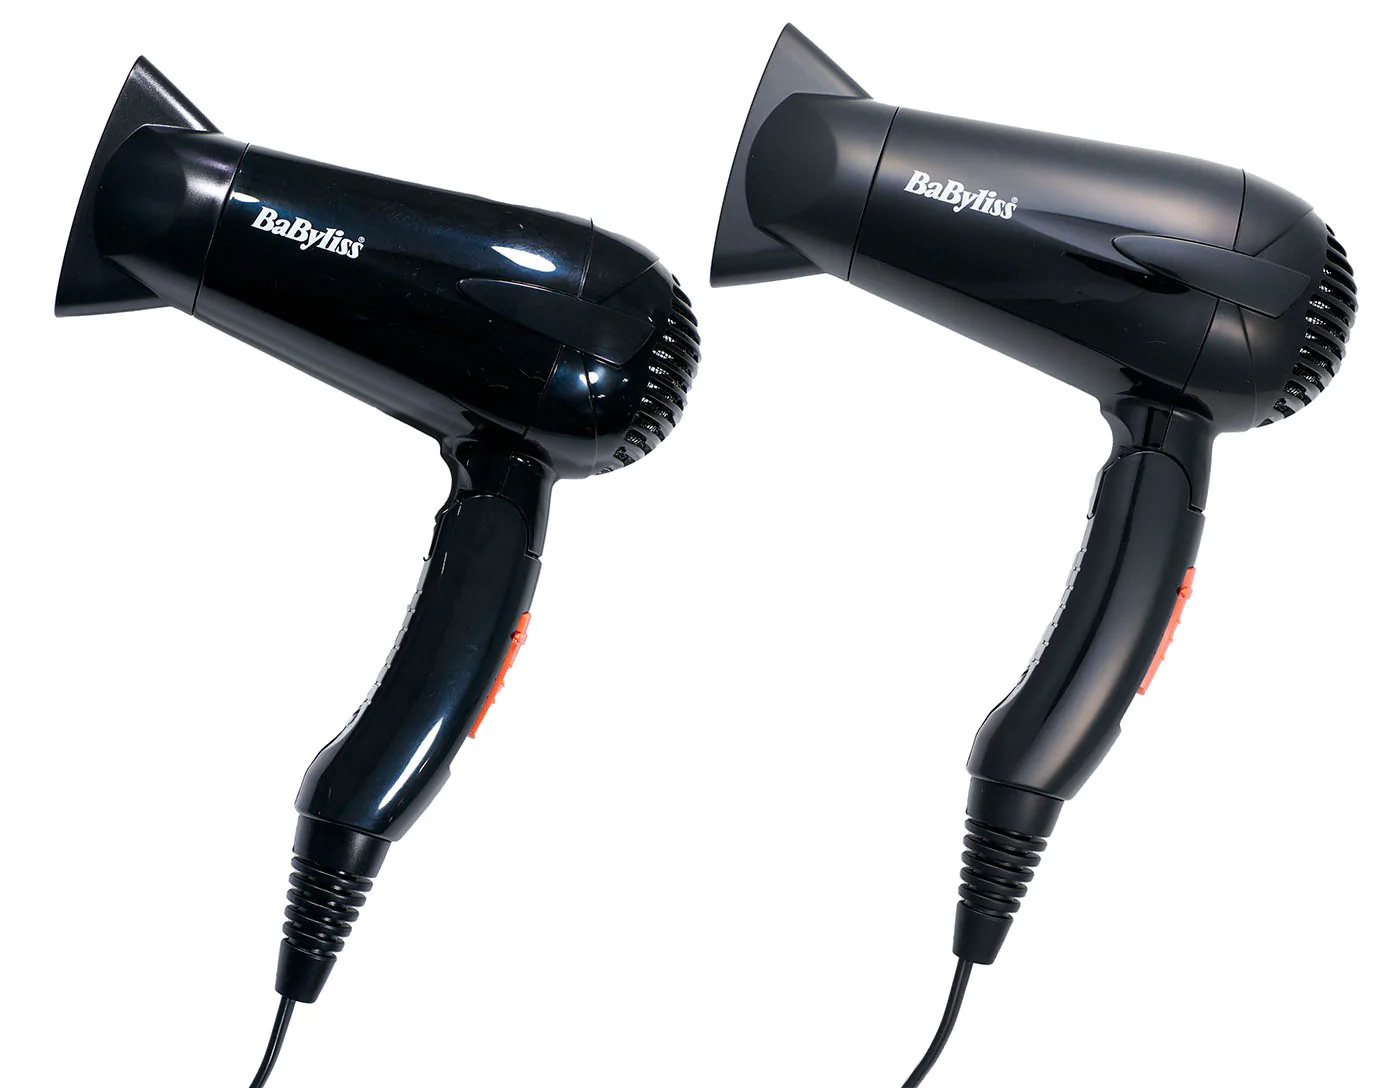 Images of hairdryer before and after using Light Cone